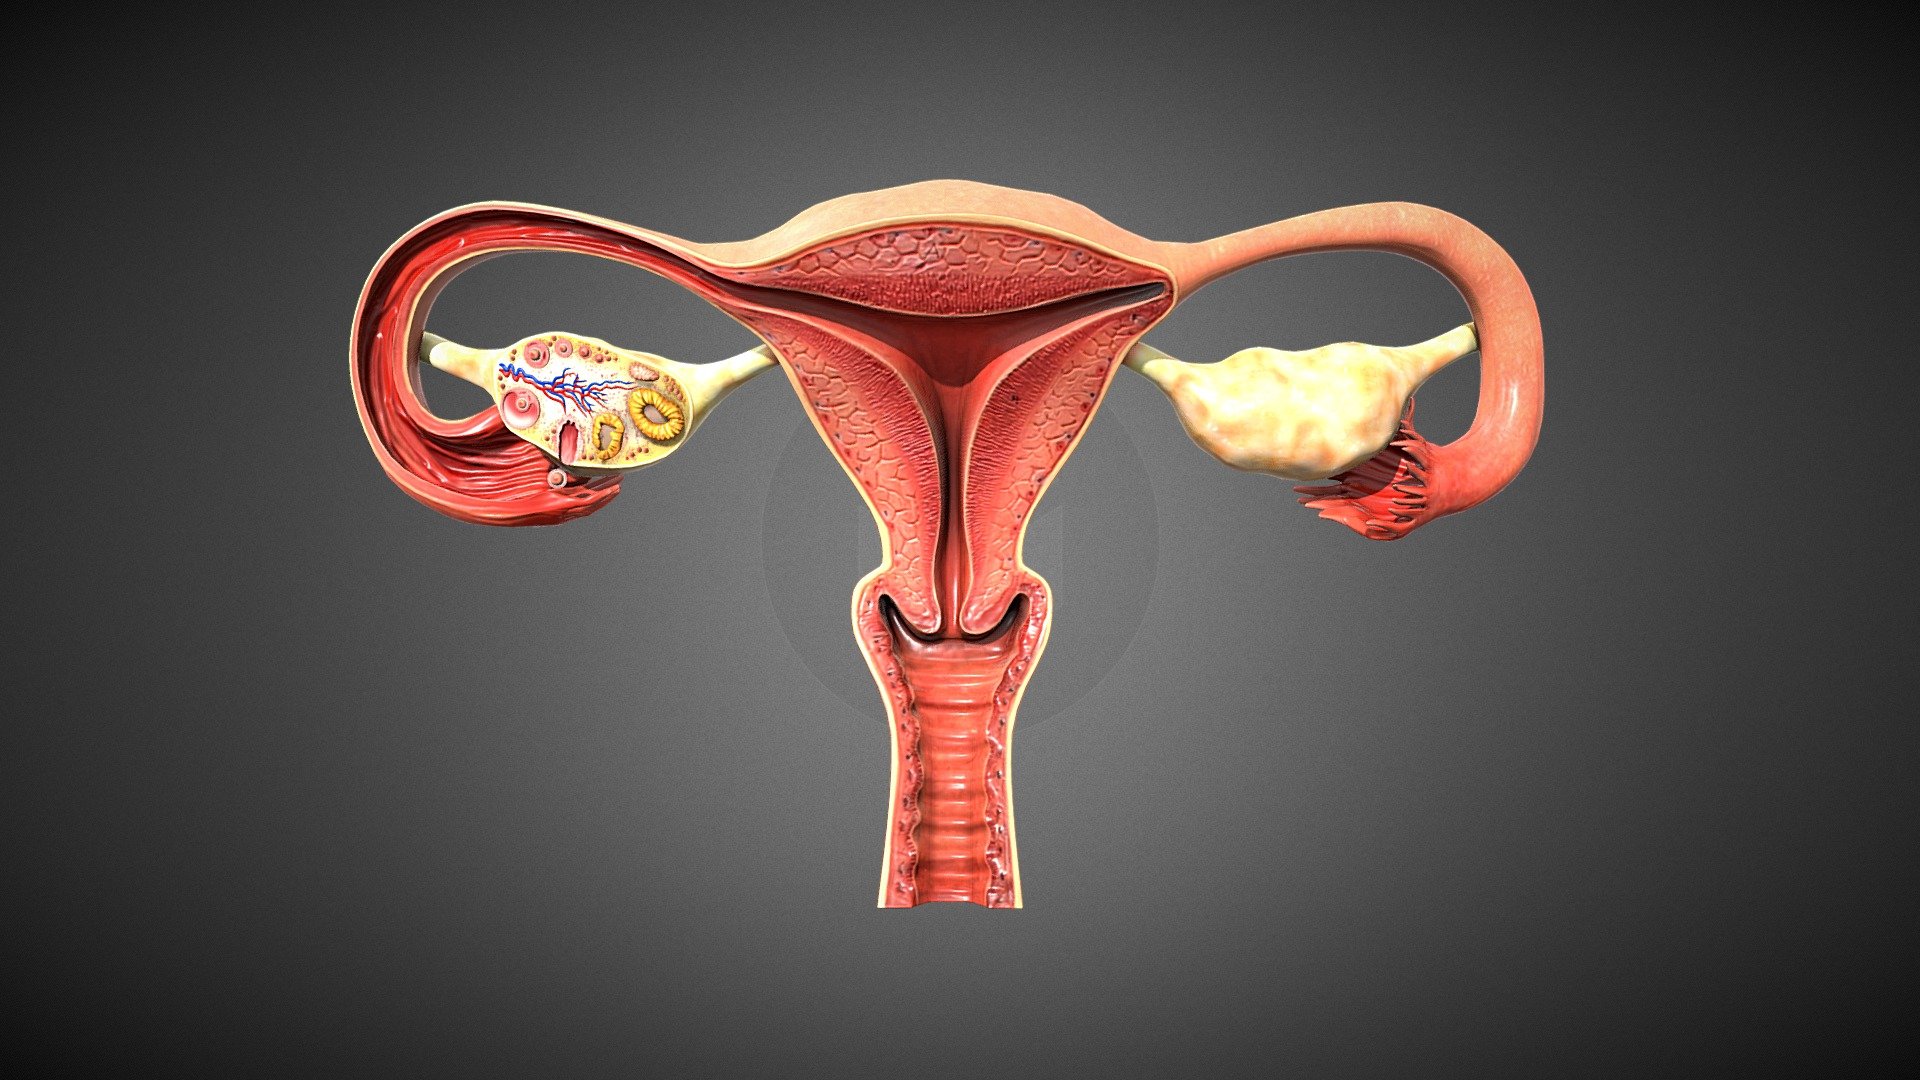 This model consists of Realistic looking of Female Reproductive System with High quality textures. These models are optimized to be compatible with AR,VR, Games, and 3D animation purposes. 

For Unity3d (Built-in, URP, HDRP) Ready Assets visit our Unity Asset Store Page

Enjoy and please rate the asset!

Contact us on for AR/VR related queries and development support

Gmail - designer@devdensolutions.com

Website

Twitter

Instagram

Facebook

Linkedin

Youtube - Female Reproductive System - Buy Royalty Free 3D model by Devden 3d model